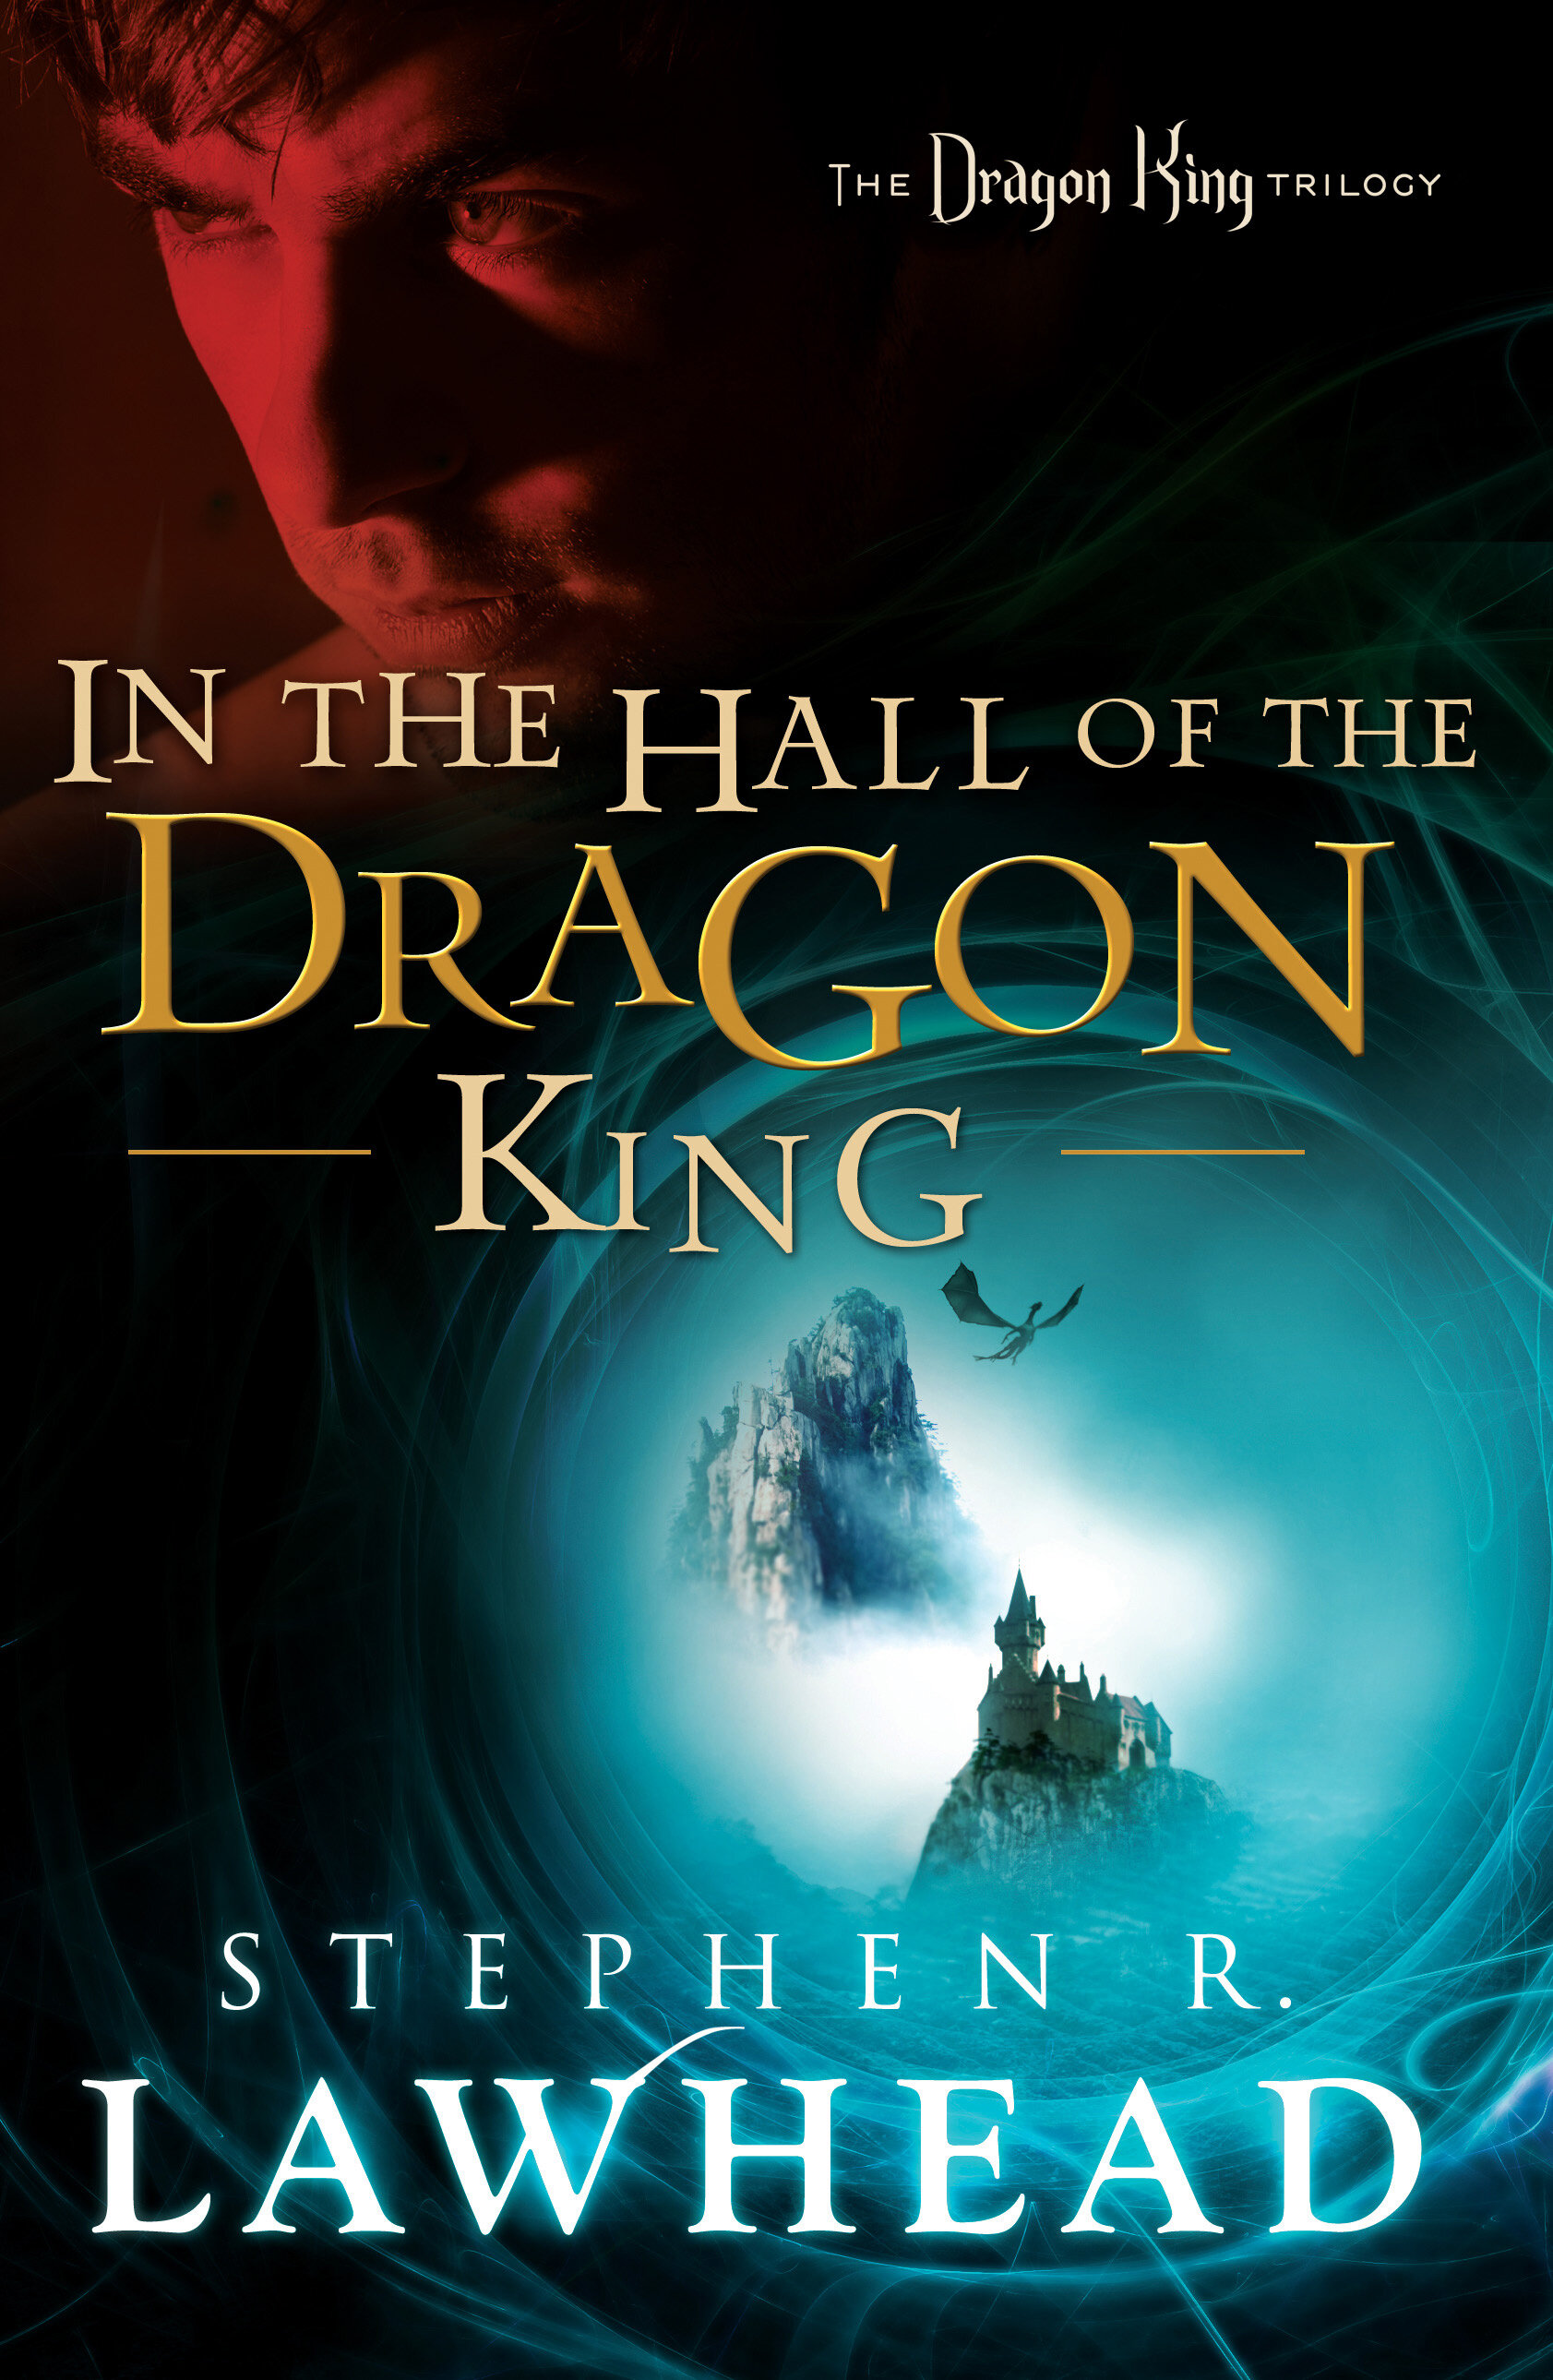 In the Hall of the Dragon King